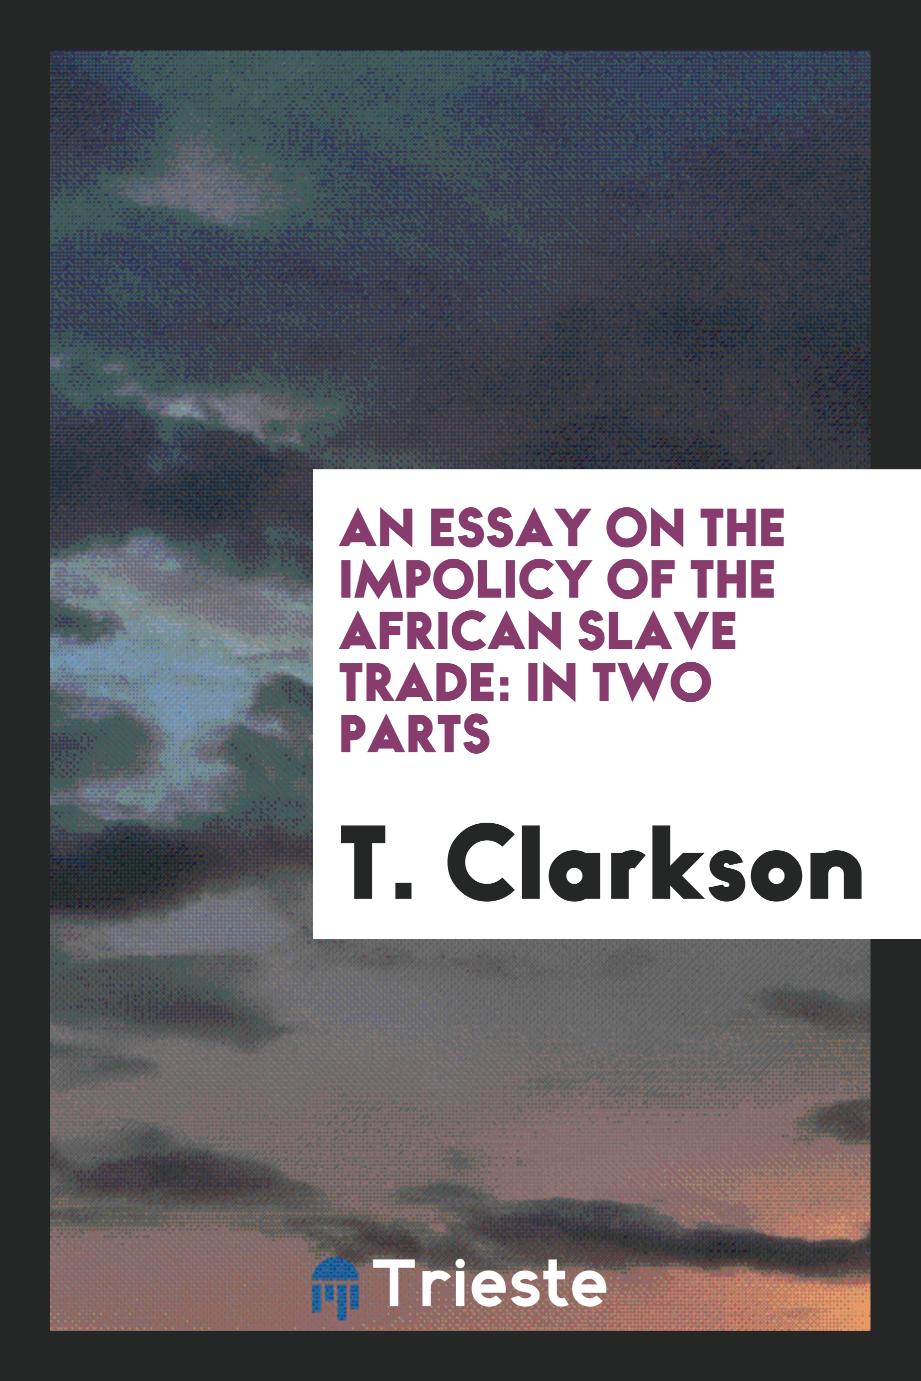 An Essay on the Impolicy of the African Slave Trade: In Two Parts